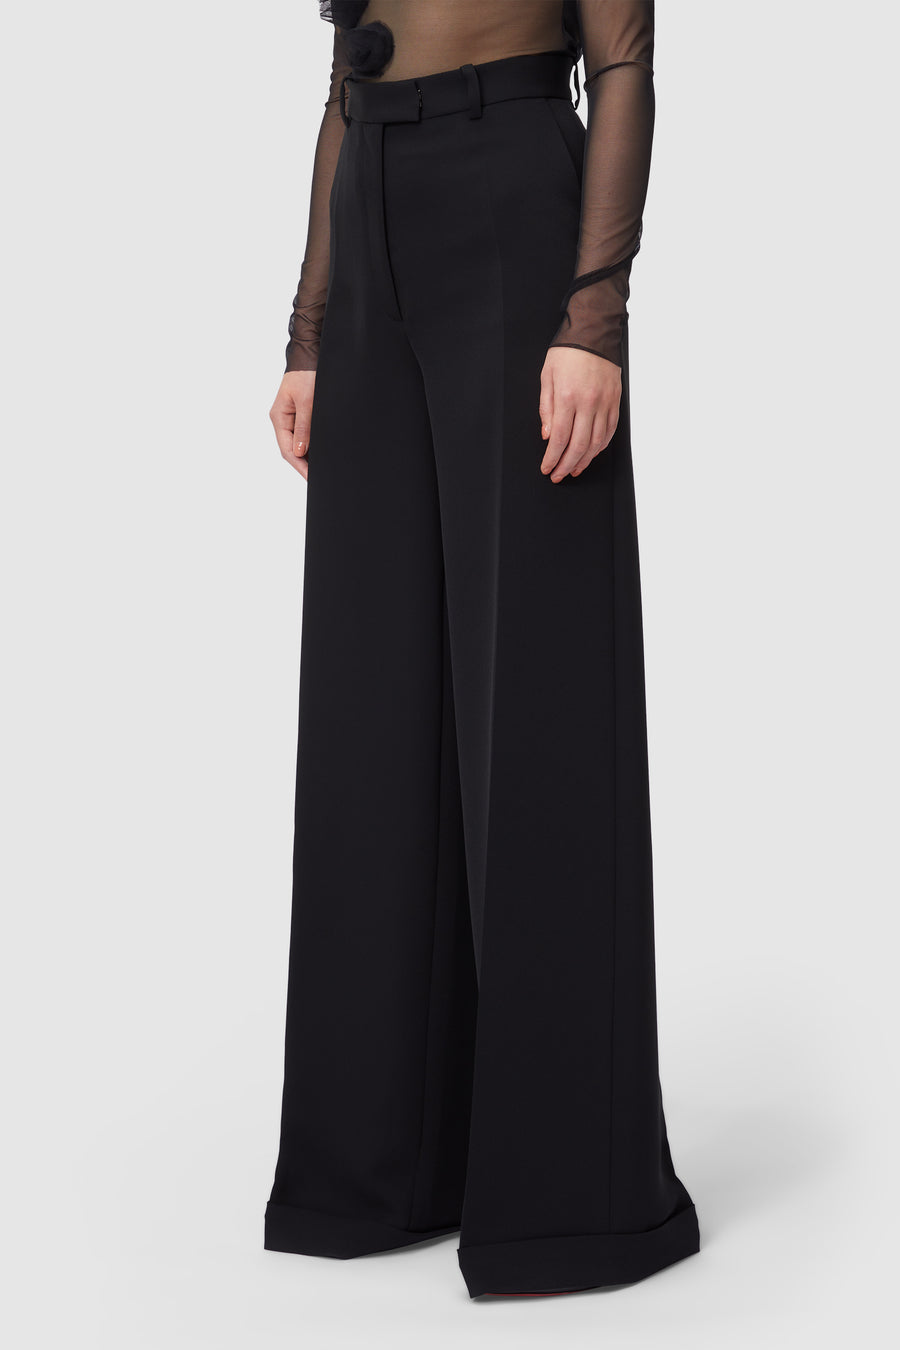 WAISTED TAILORED BLACK TROUSER